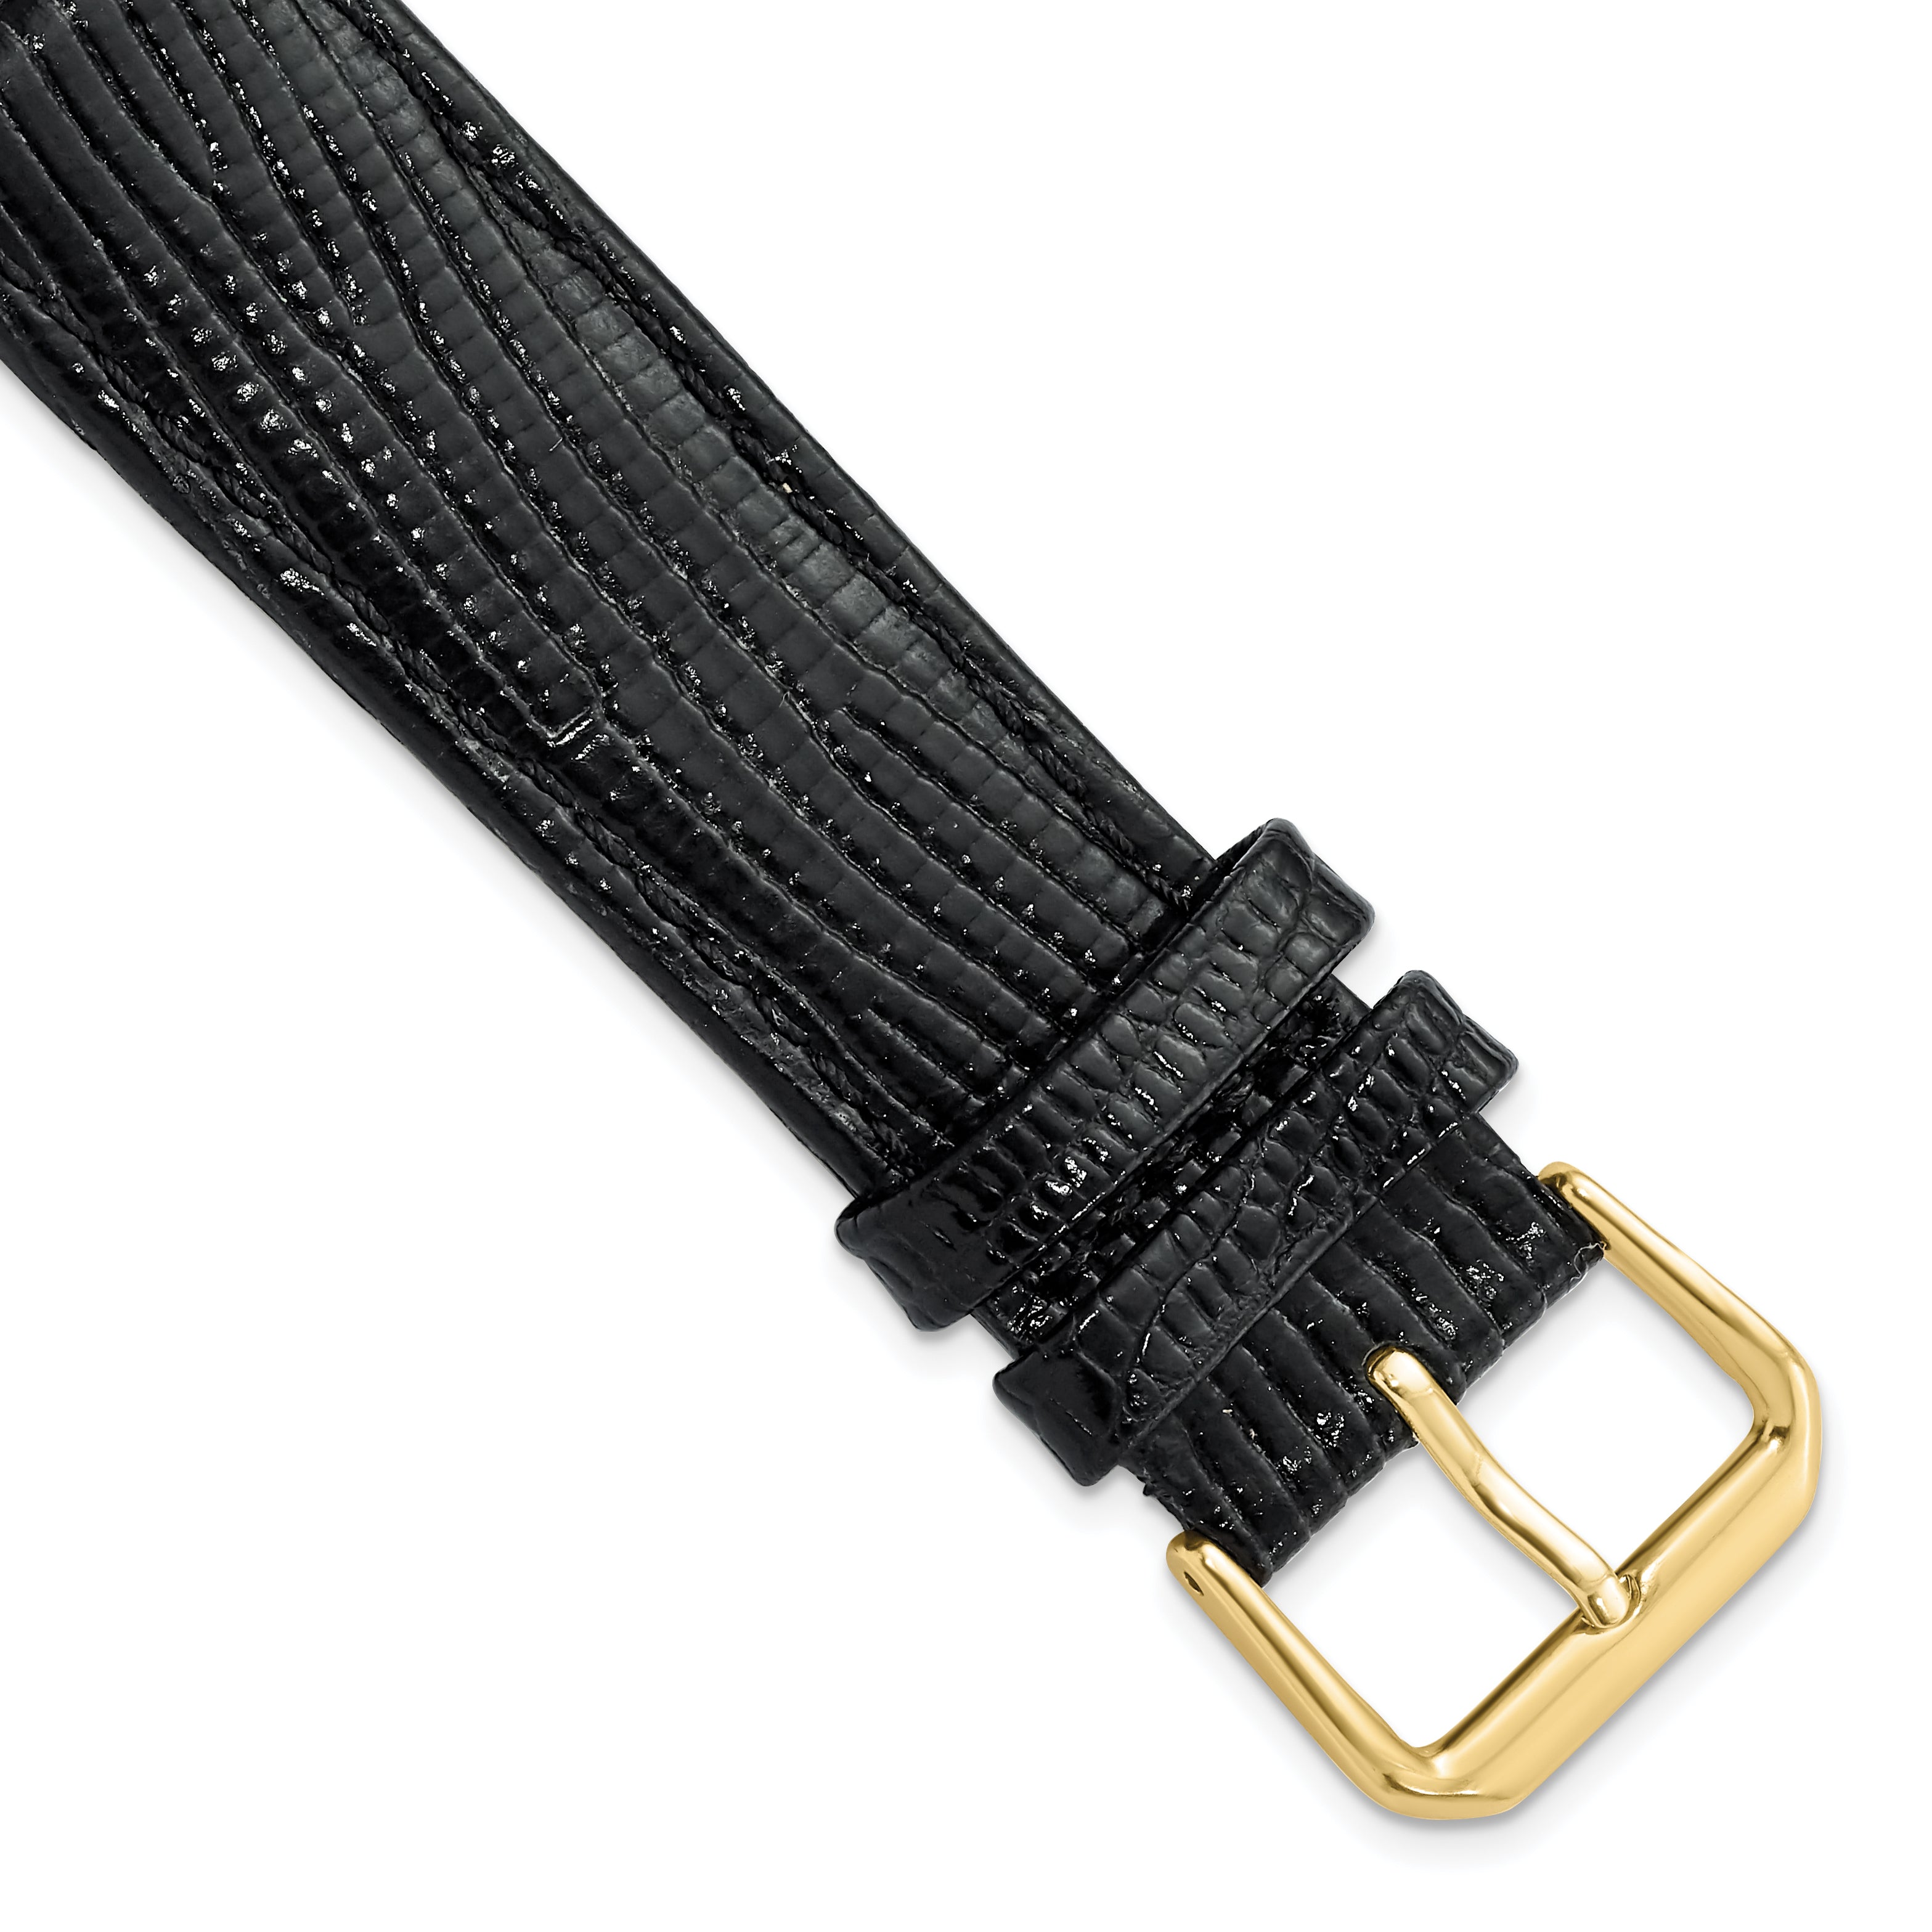 DeBeer 20mm Black Snake Grain Leather with Gold-tone Buckle 7.5 inch Watch Band